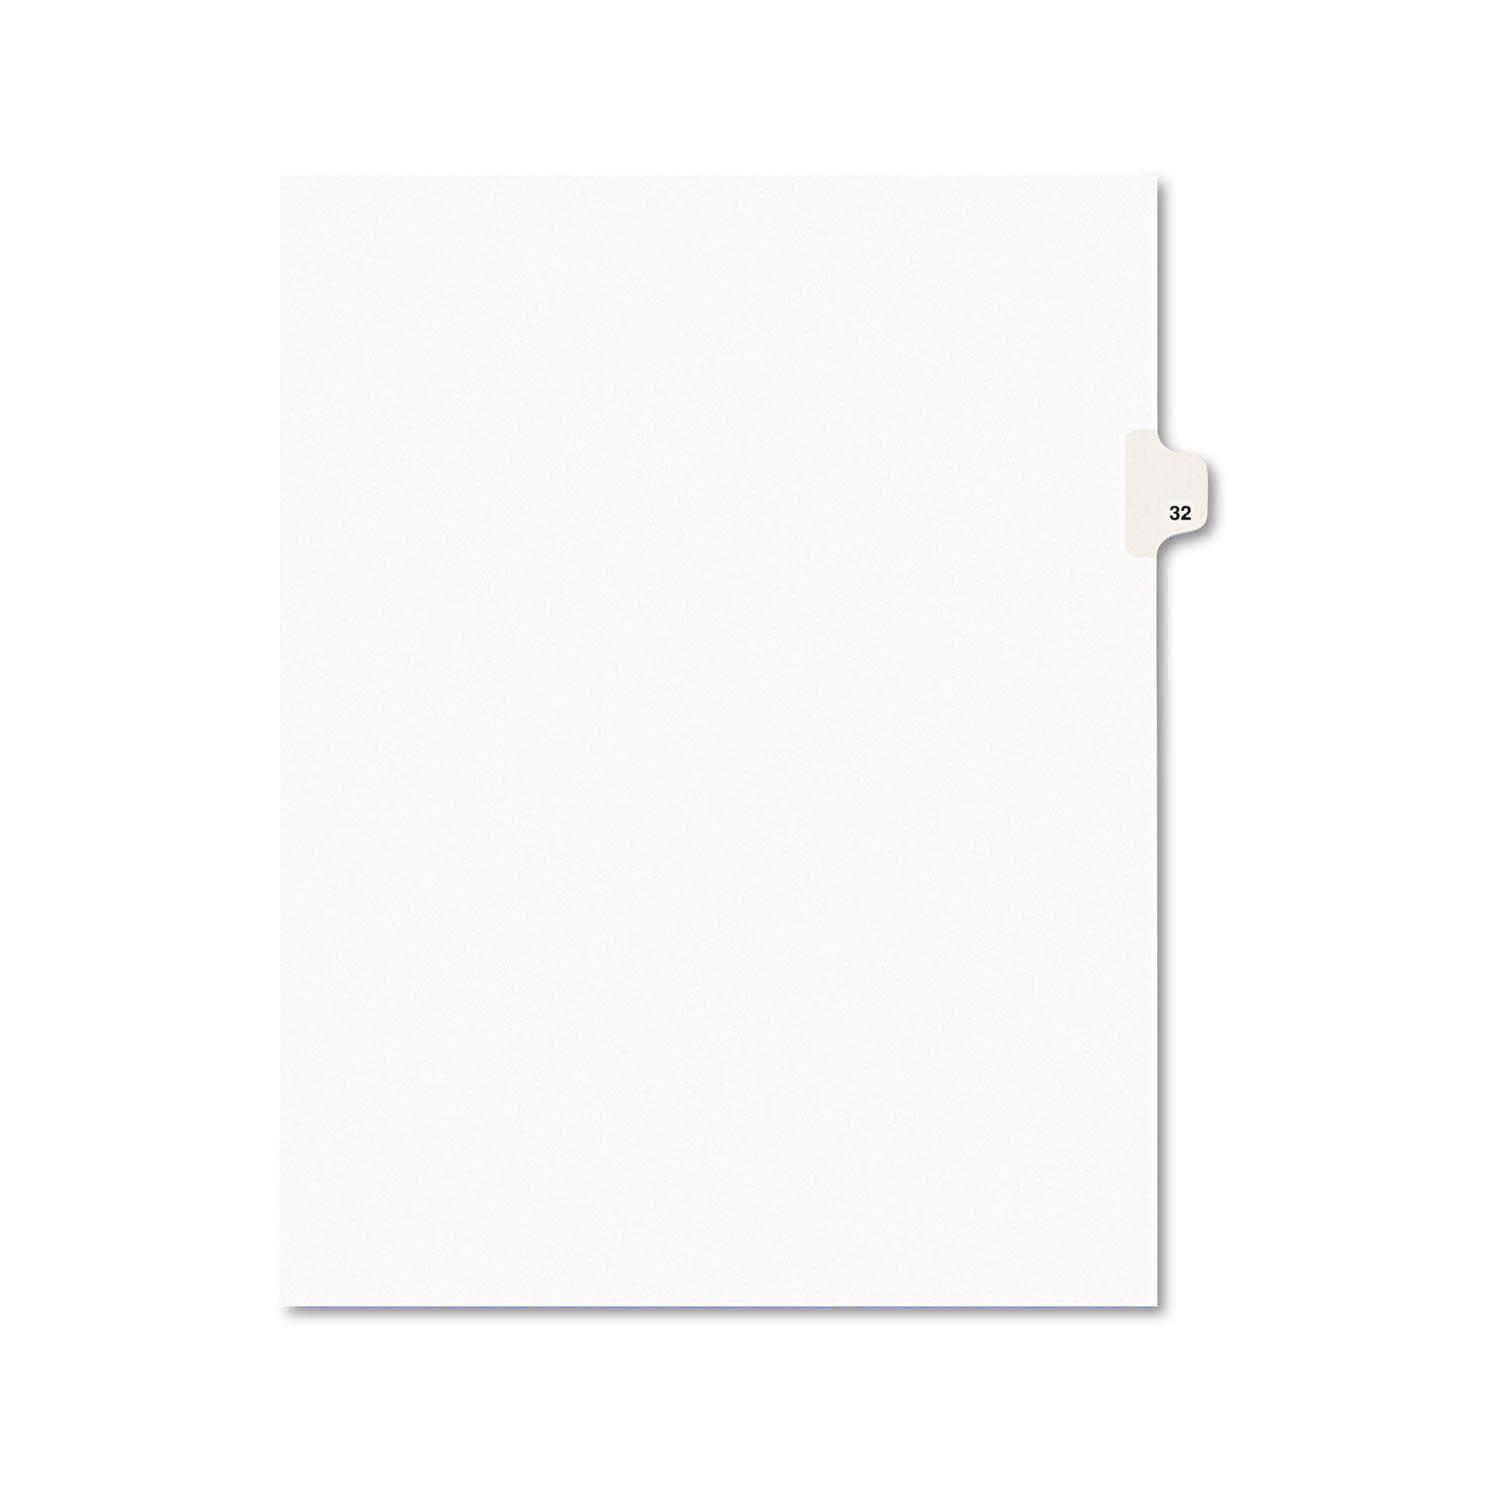  Avery 01032 Preprinted Legal Exhibit Side Tab Index Dividers, Avery Style, 10-Tab, 32, 11 x 8.5, White, 25/Pack (AVE01032) 